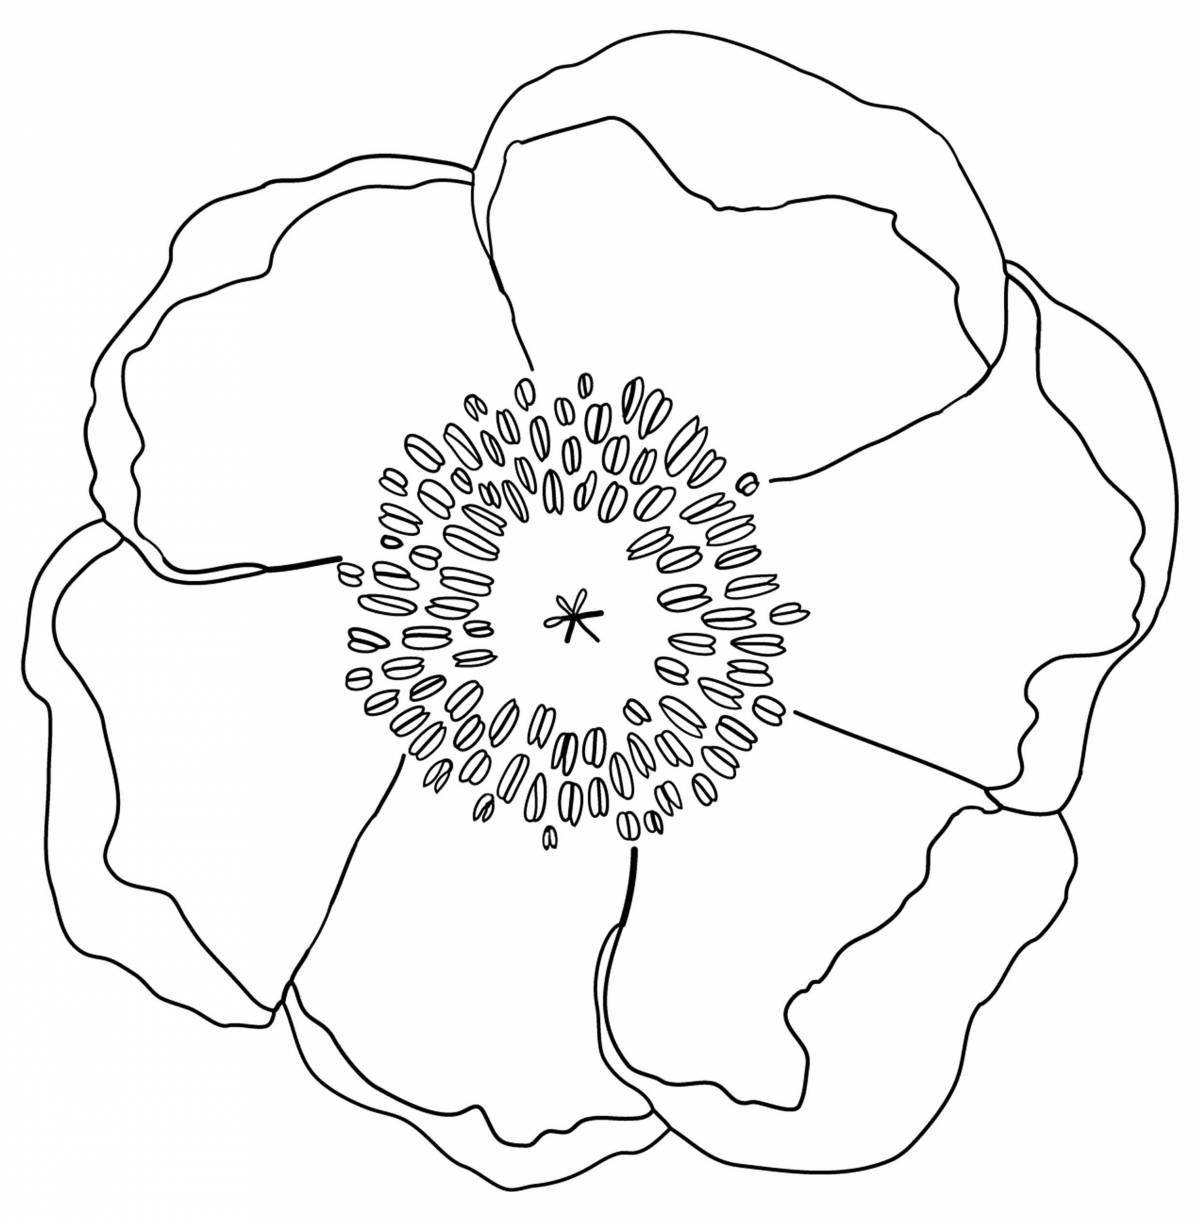 Coloring page living poppy flower